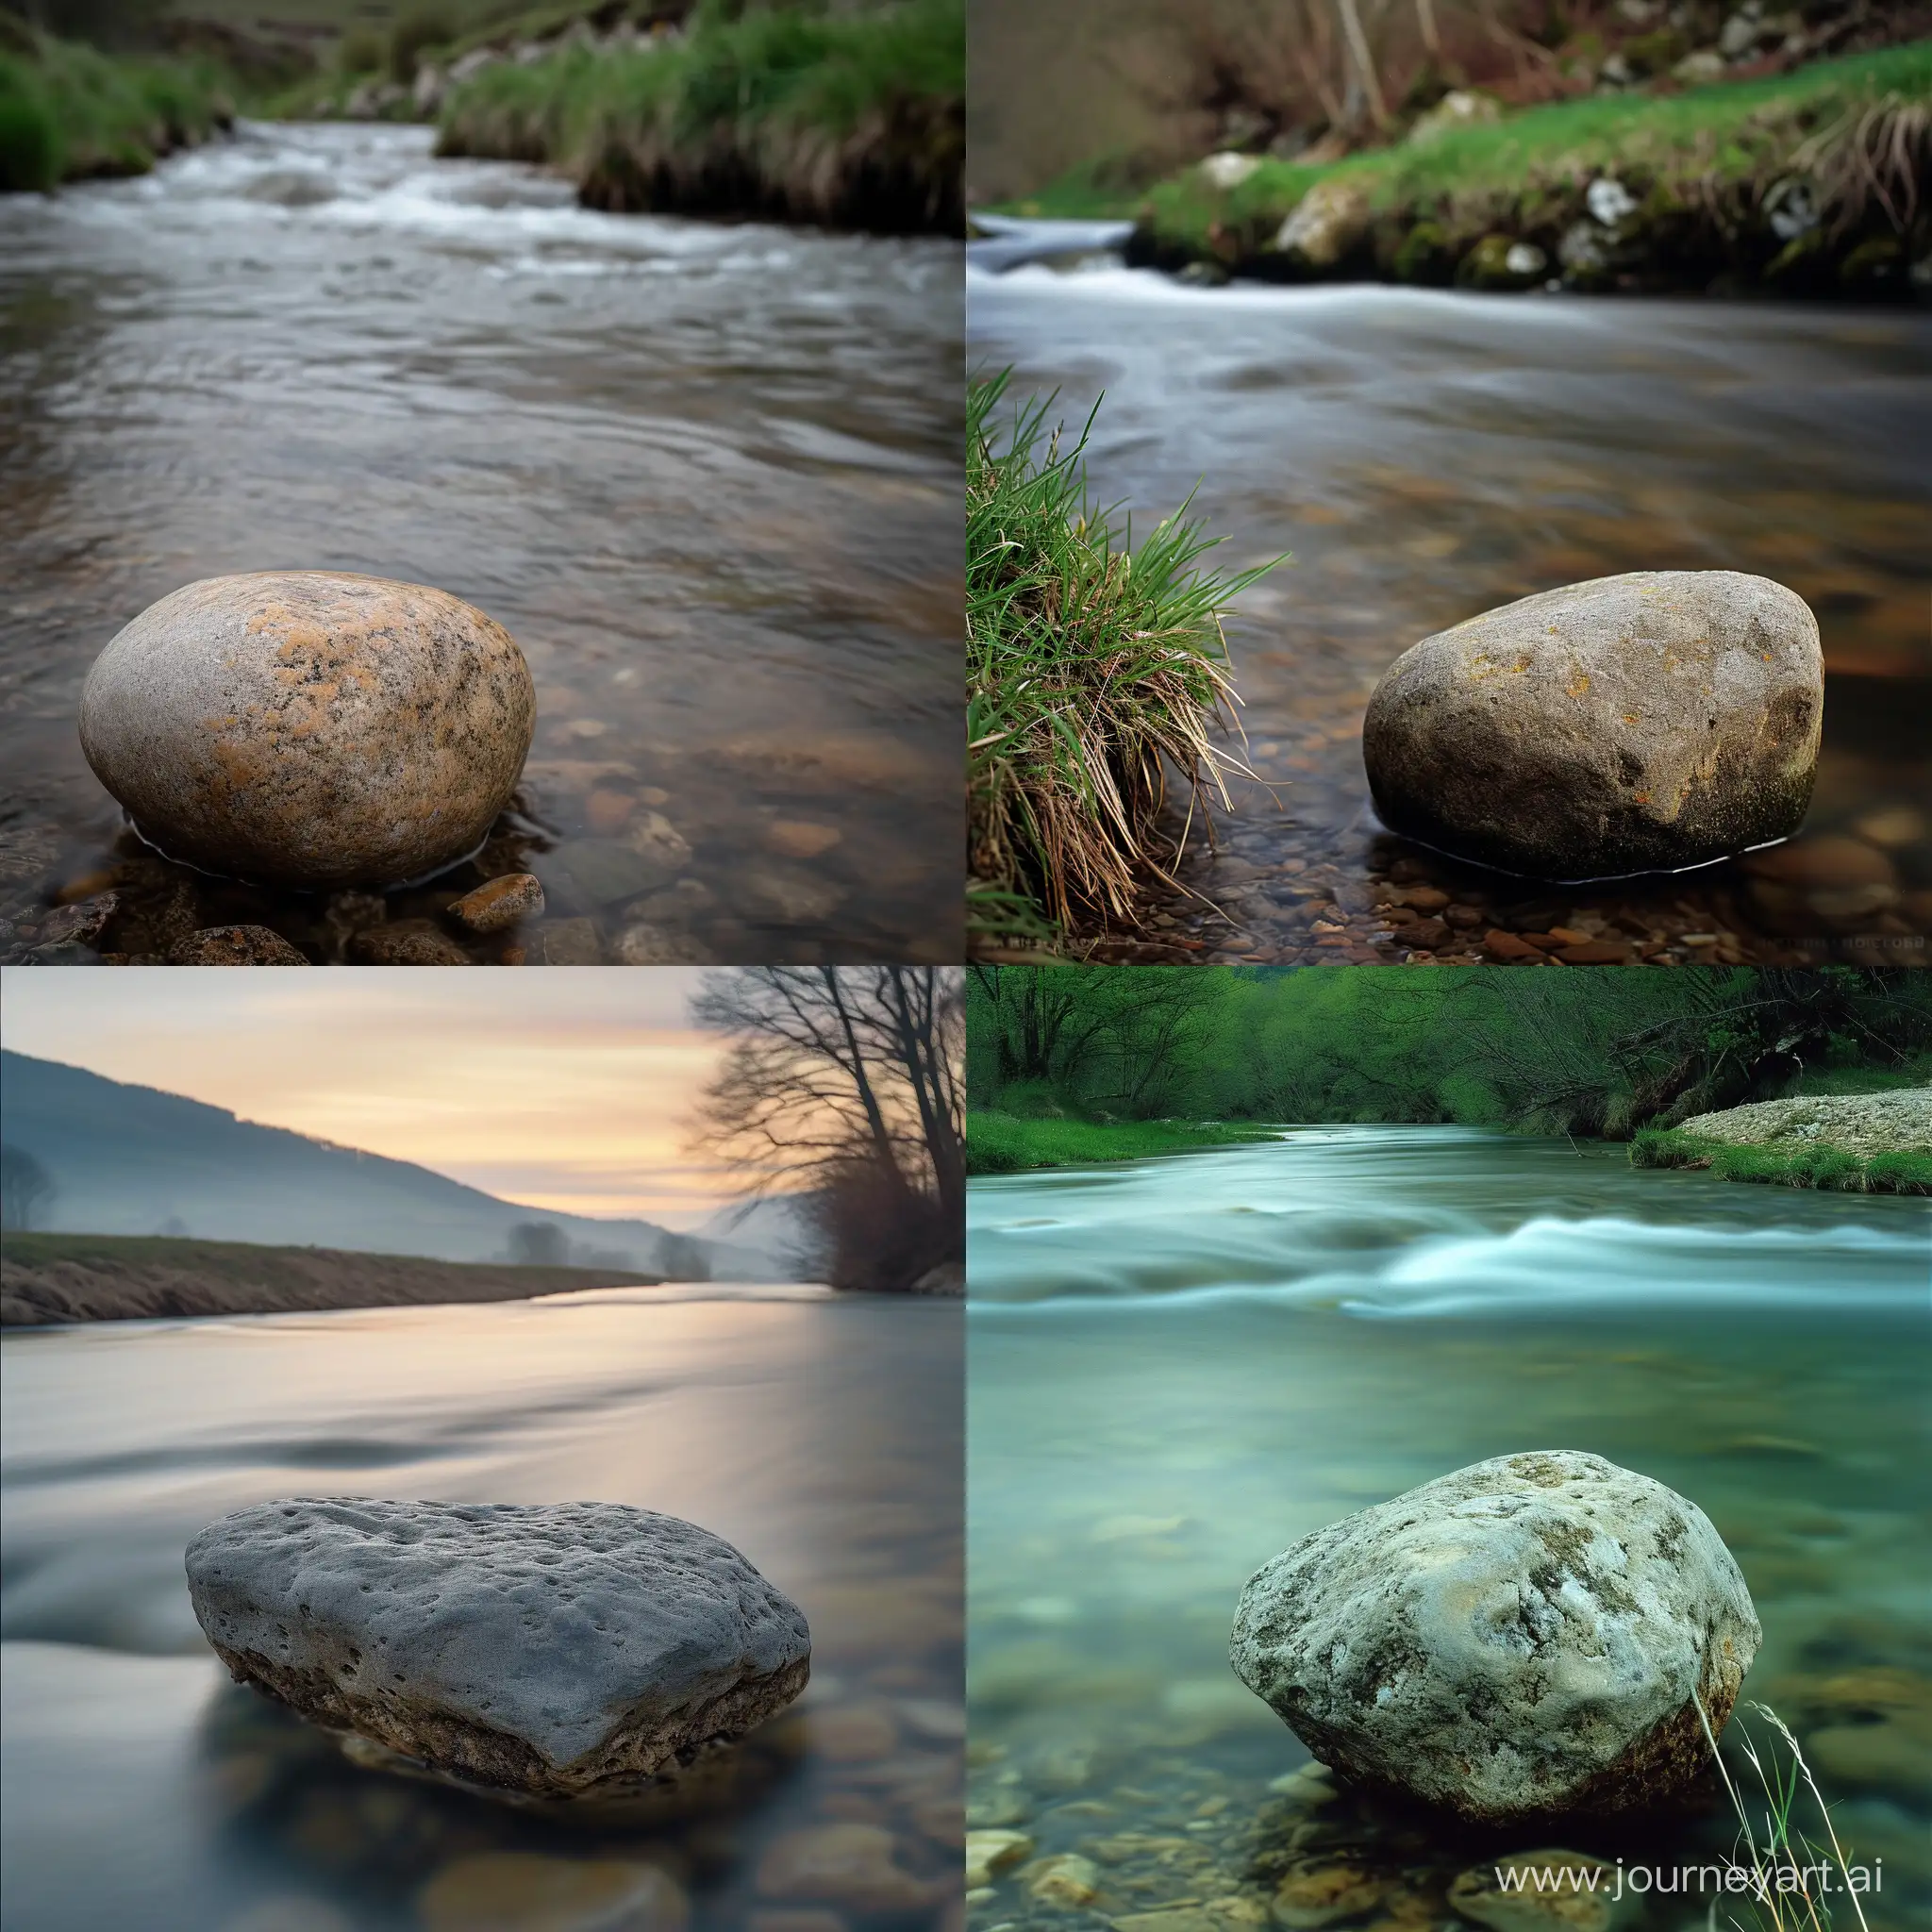 A stone sitting by a river